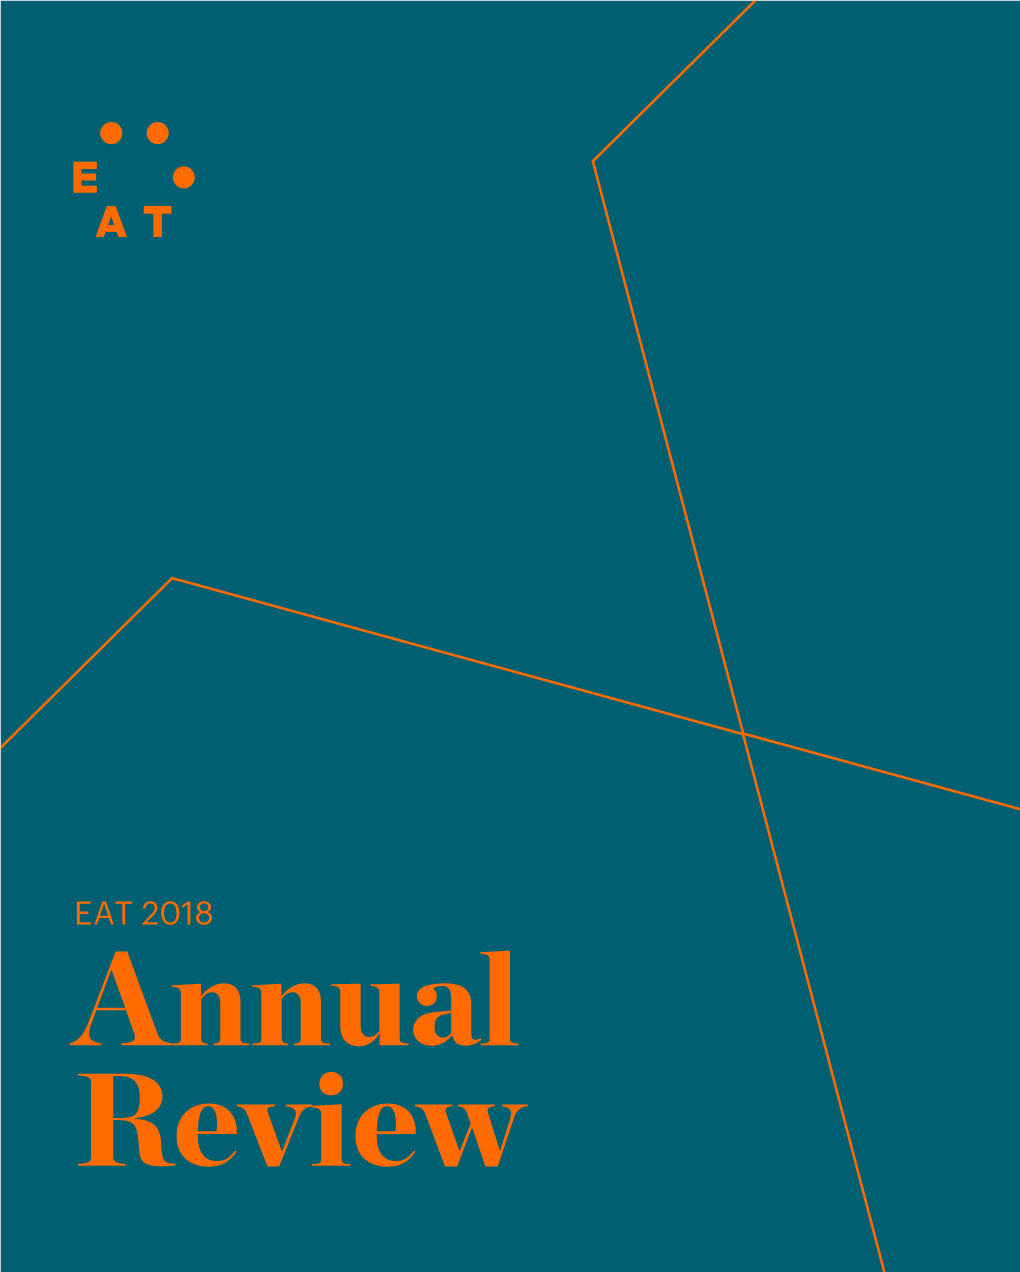 EAT Annual Review 2018